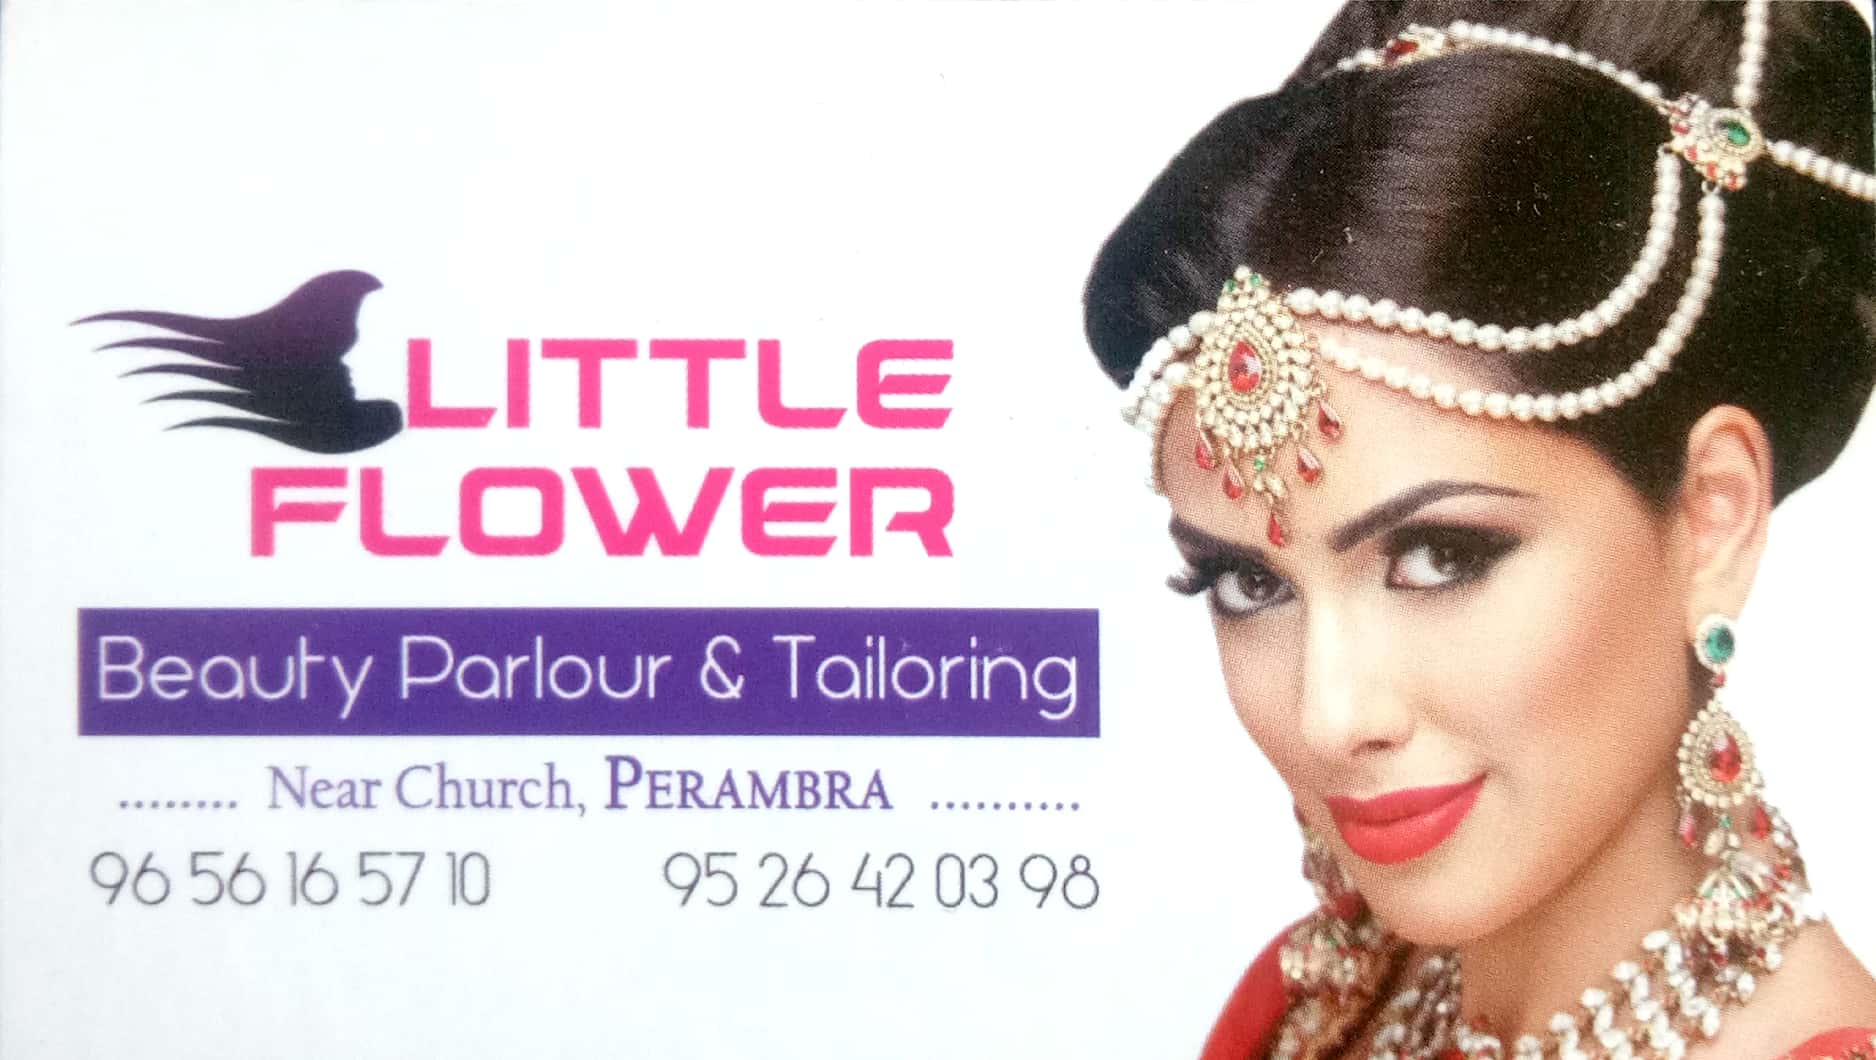 LITTLE FLOWER BEAUTY PARLOUR CHALAKUDY, BEAUTY PARLOUR,  service in Chalakudy, Thrissur